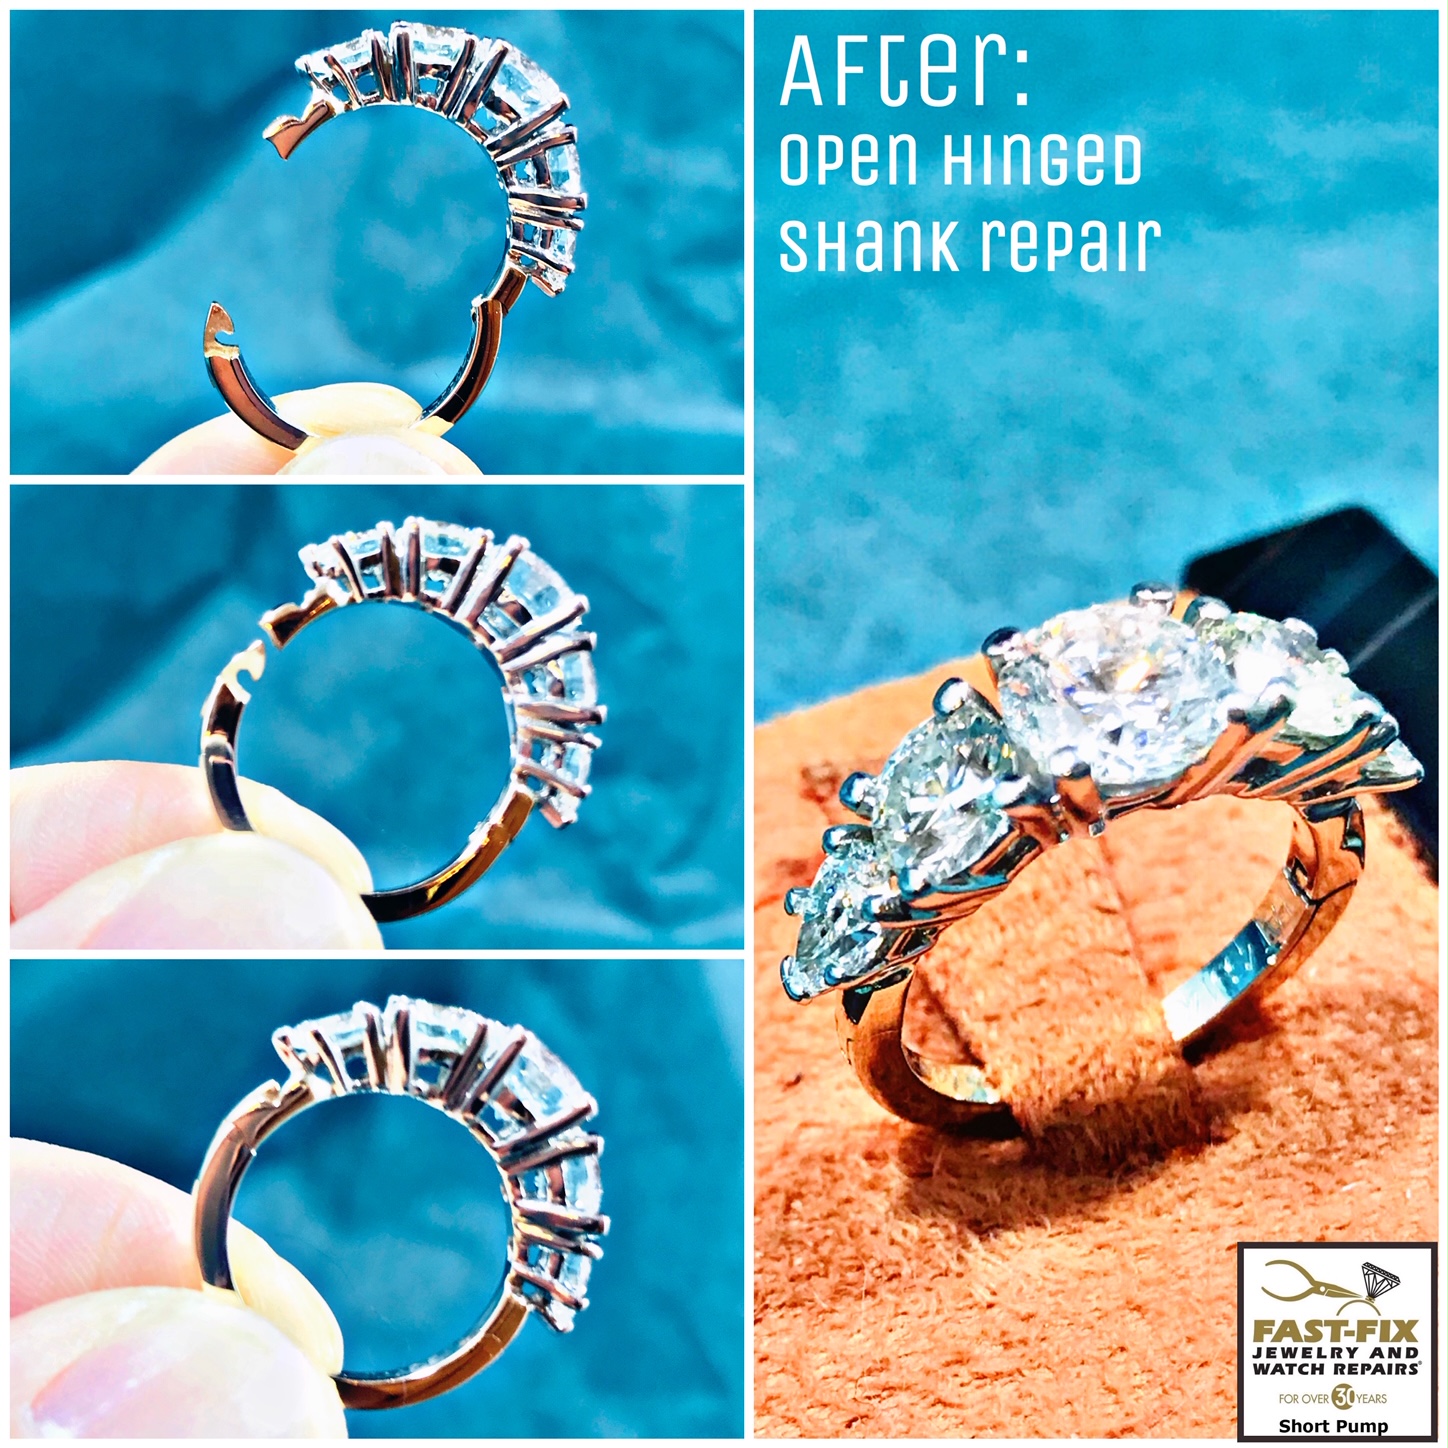 We repair this diamond ring with a open hinged shank for large knuckles